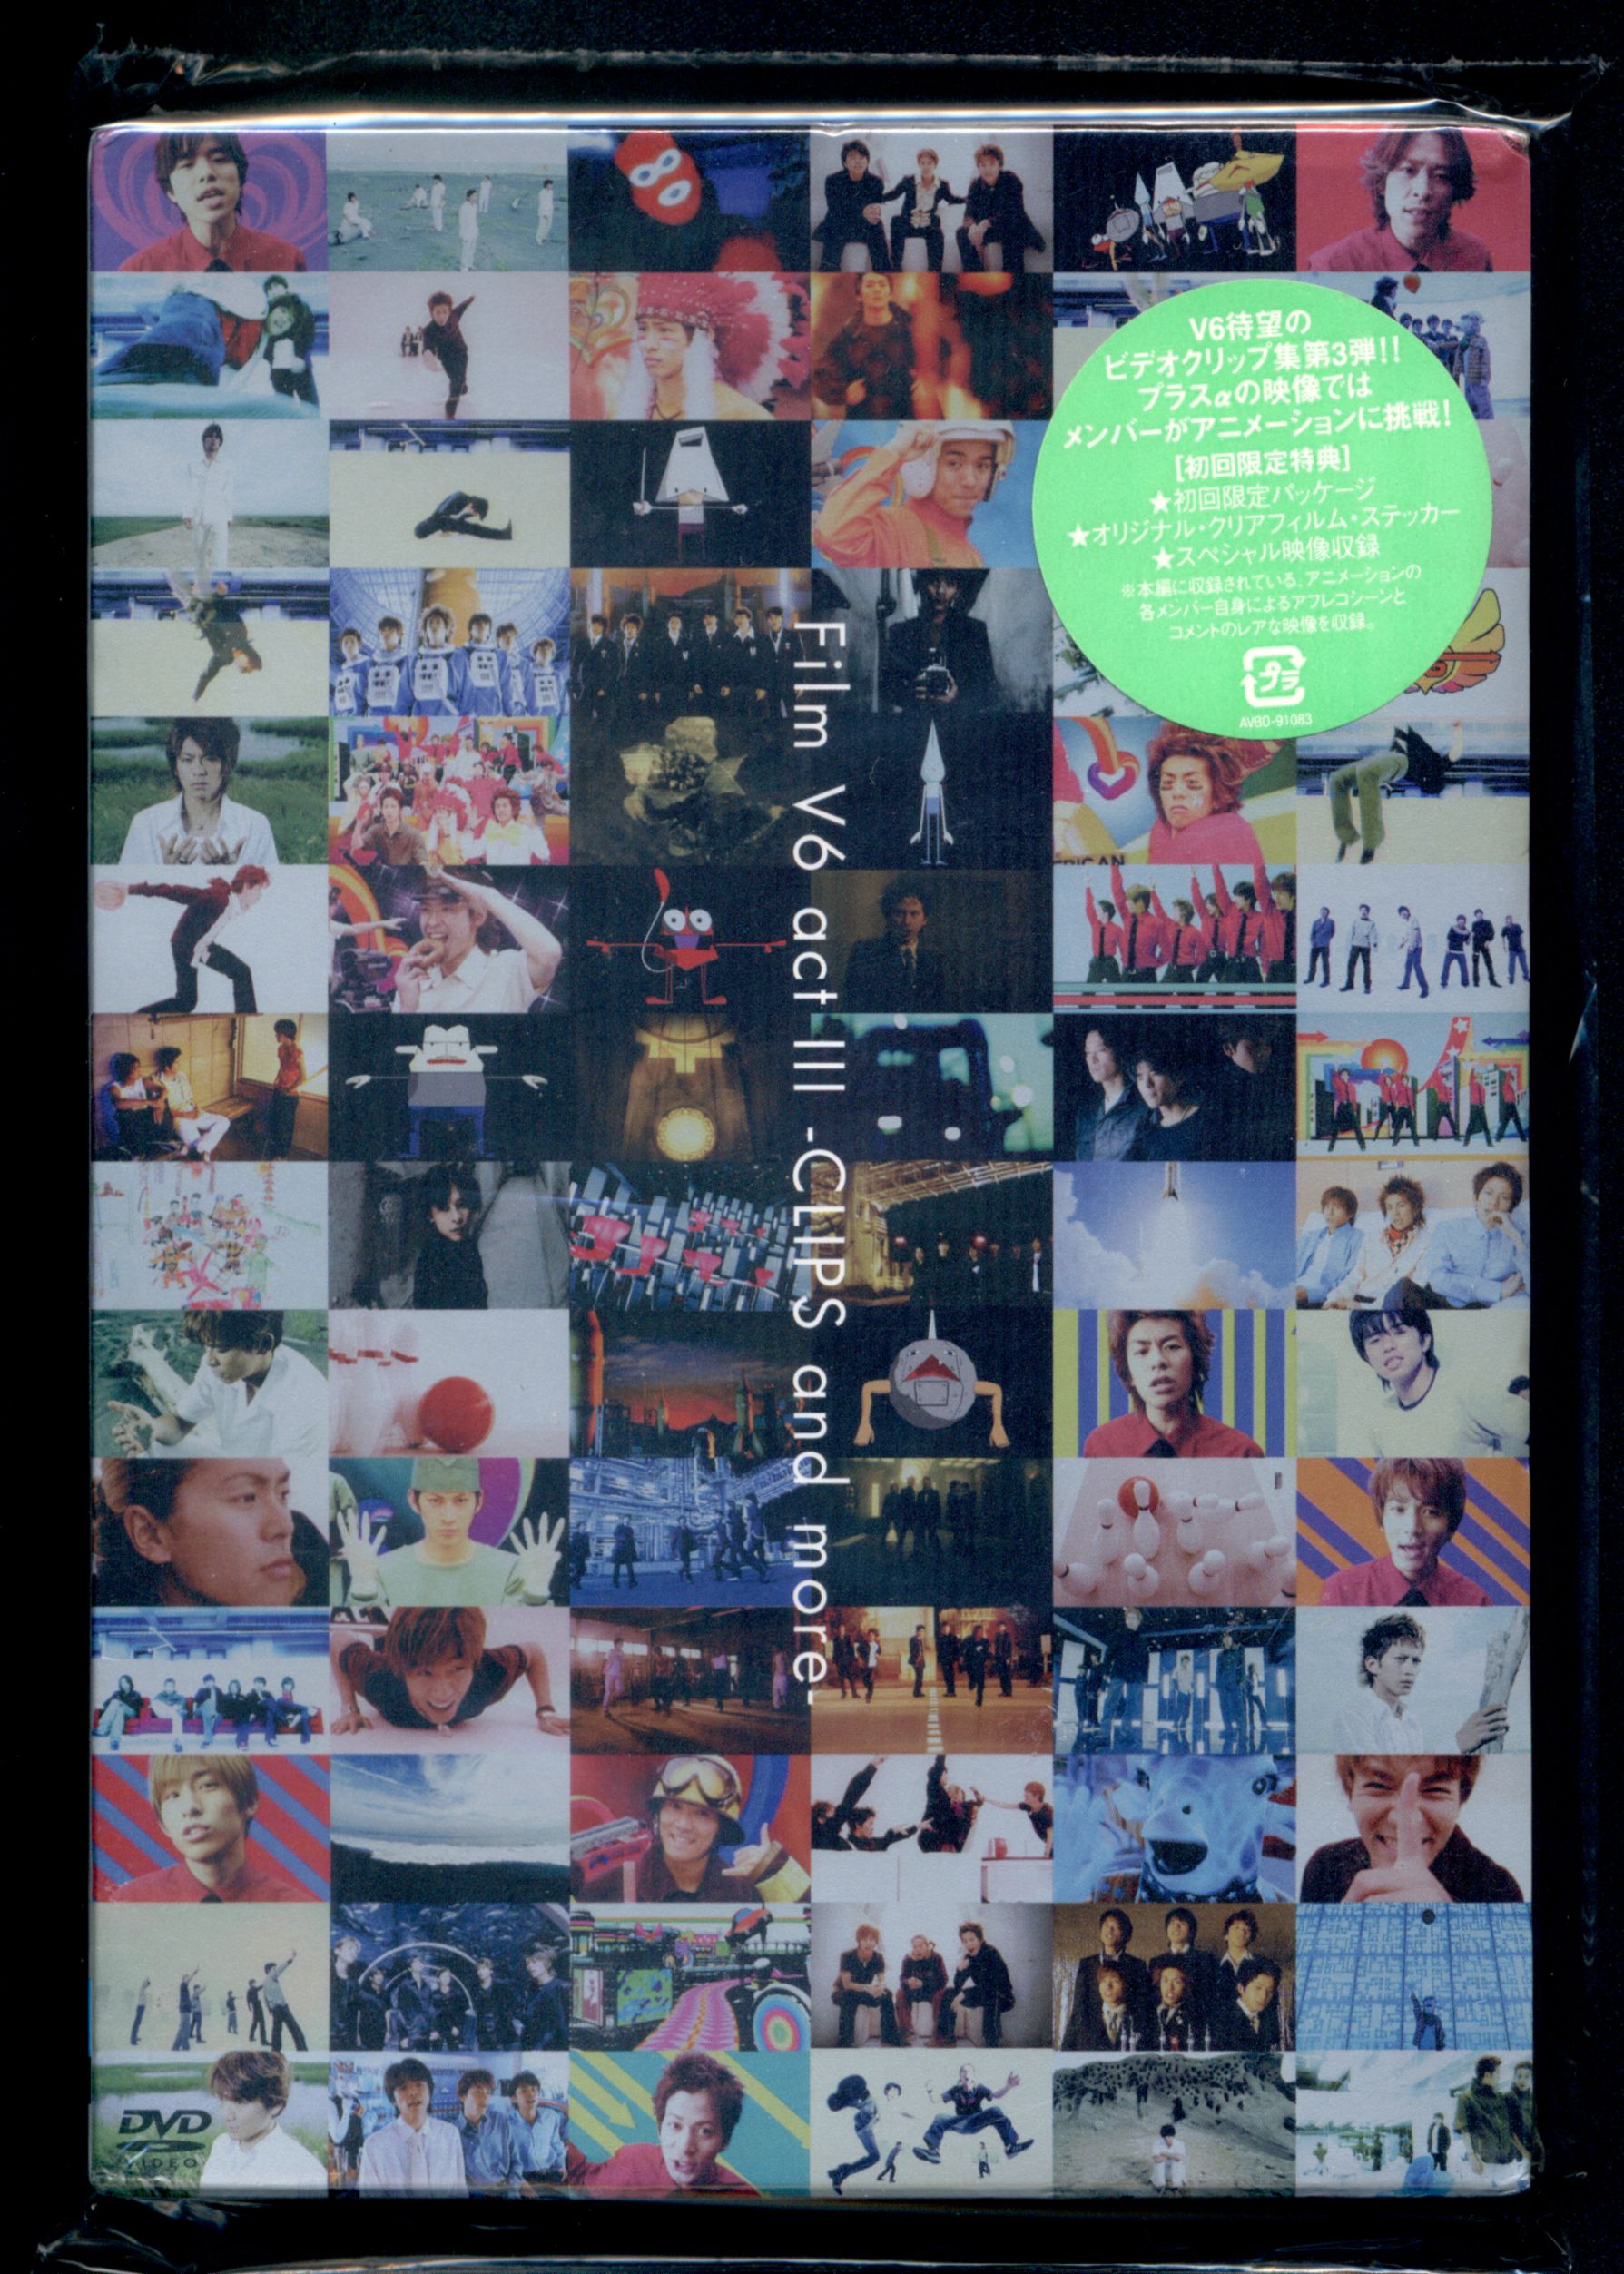 V6 Film V6 Act Iii Clips And More 3 Dvdfirst Edition Limited Ed Disc Mandarake 在线商店